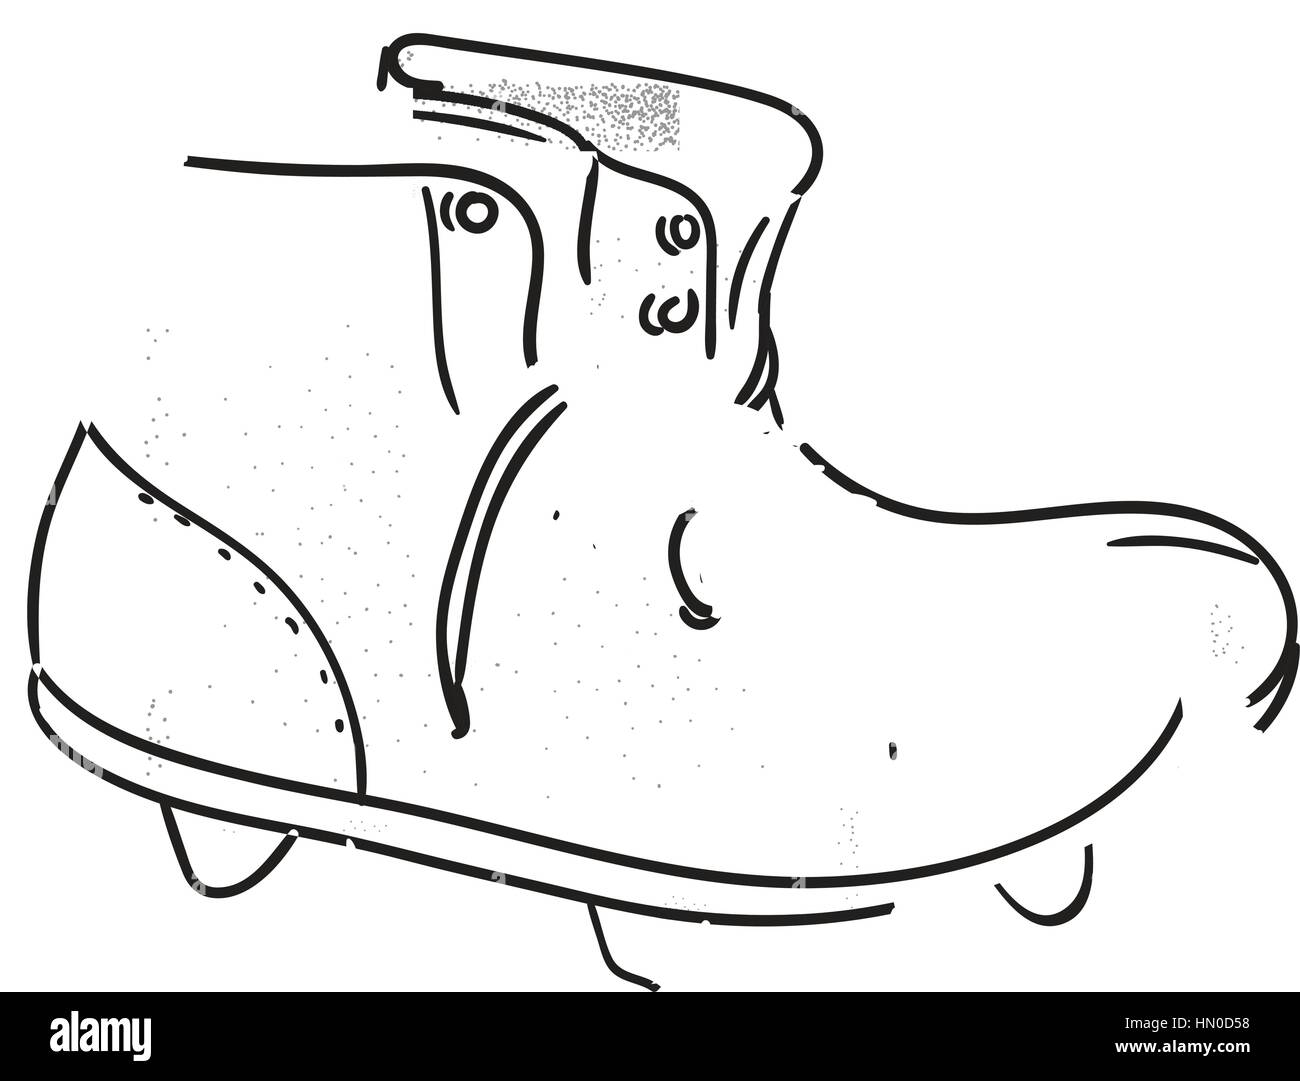 Drawing sketch style illustration of a vintage american football boots viewed from the side set on isolated white background. Stock Vector